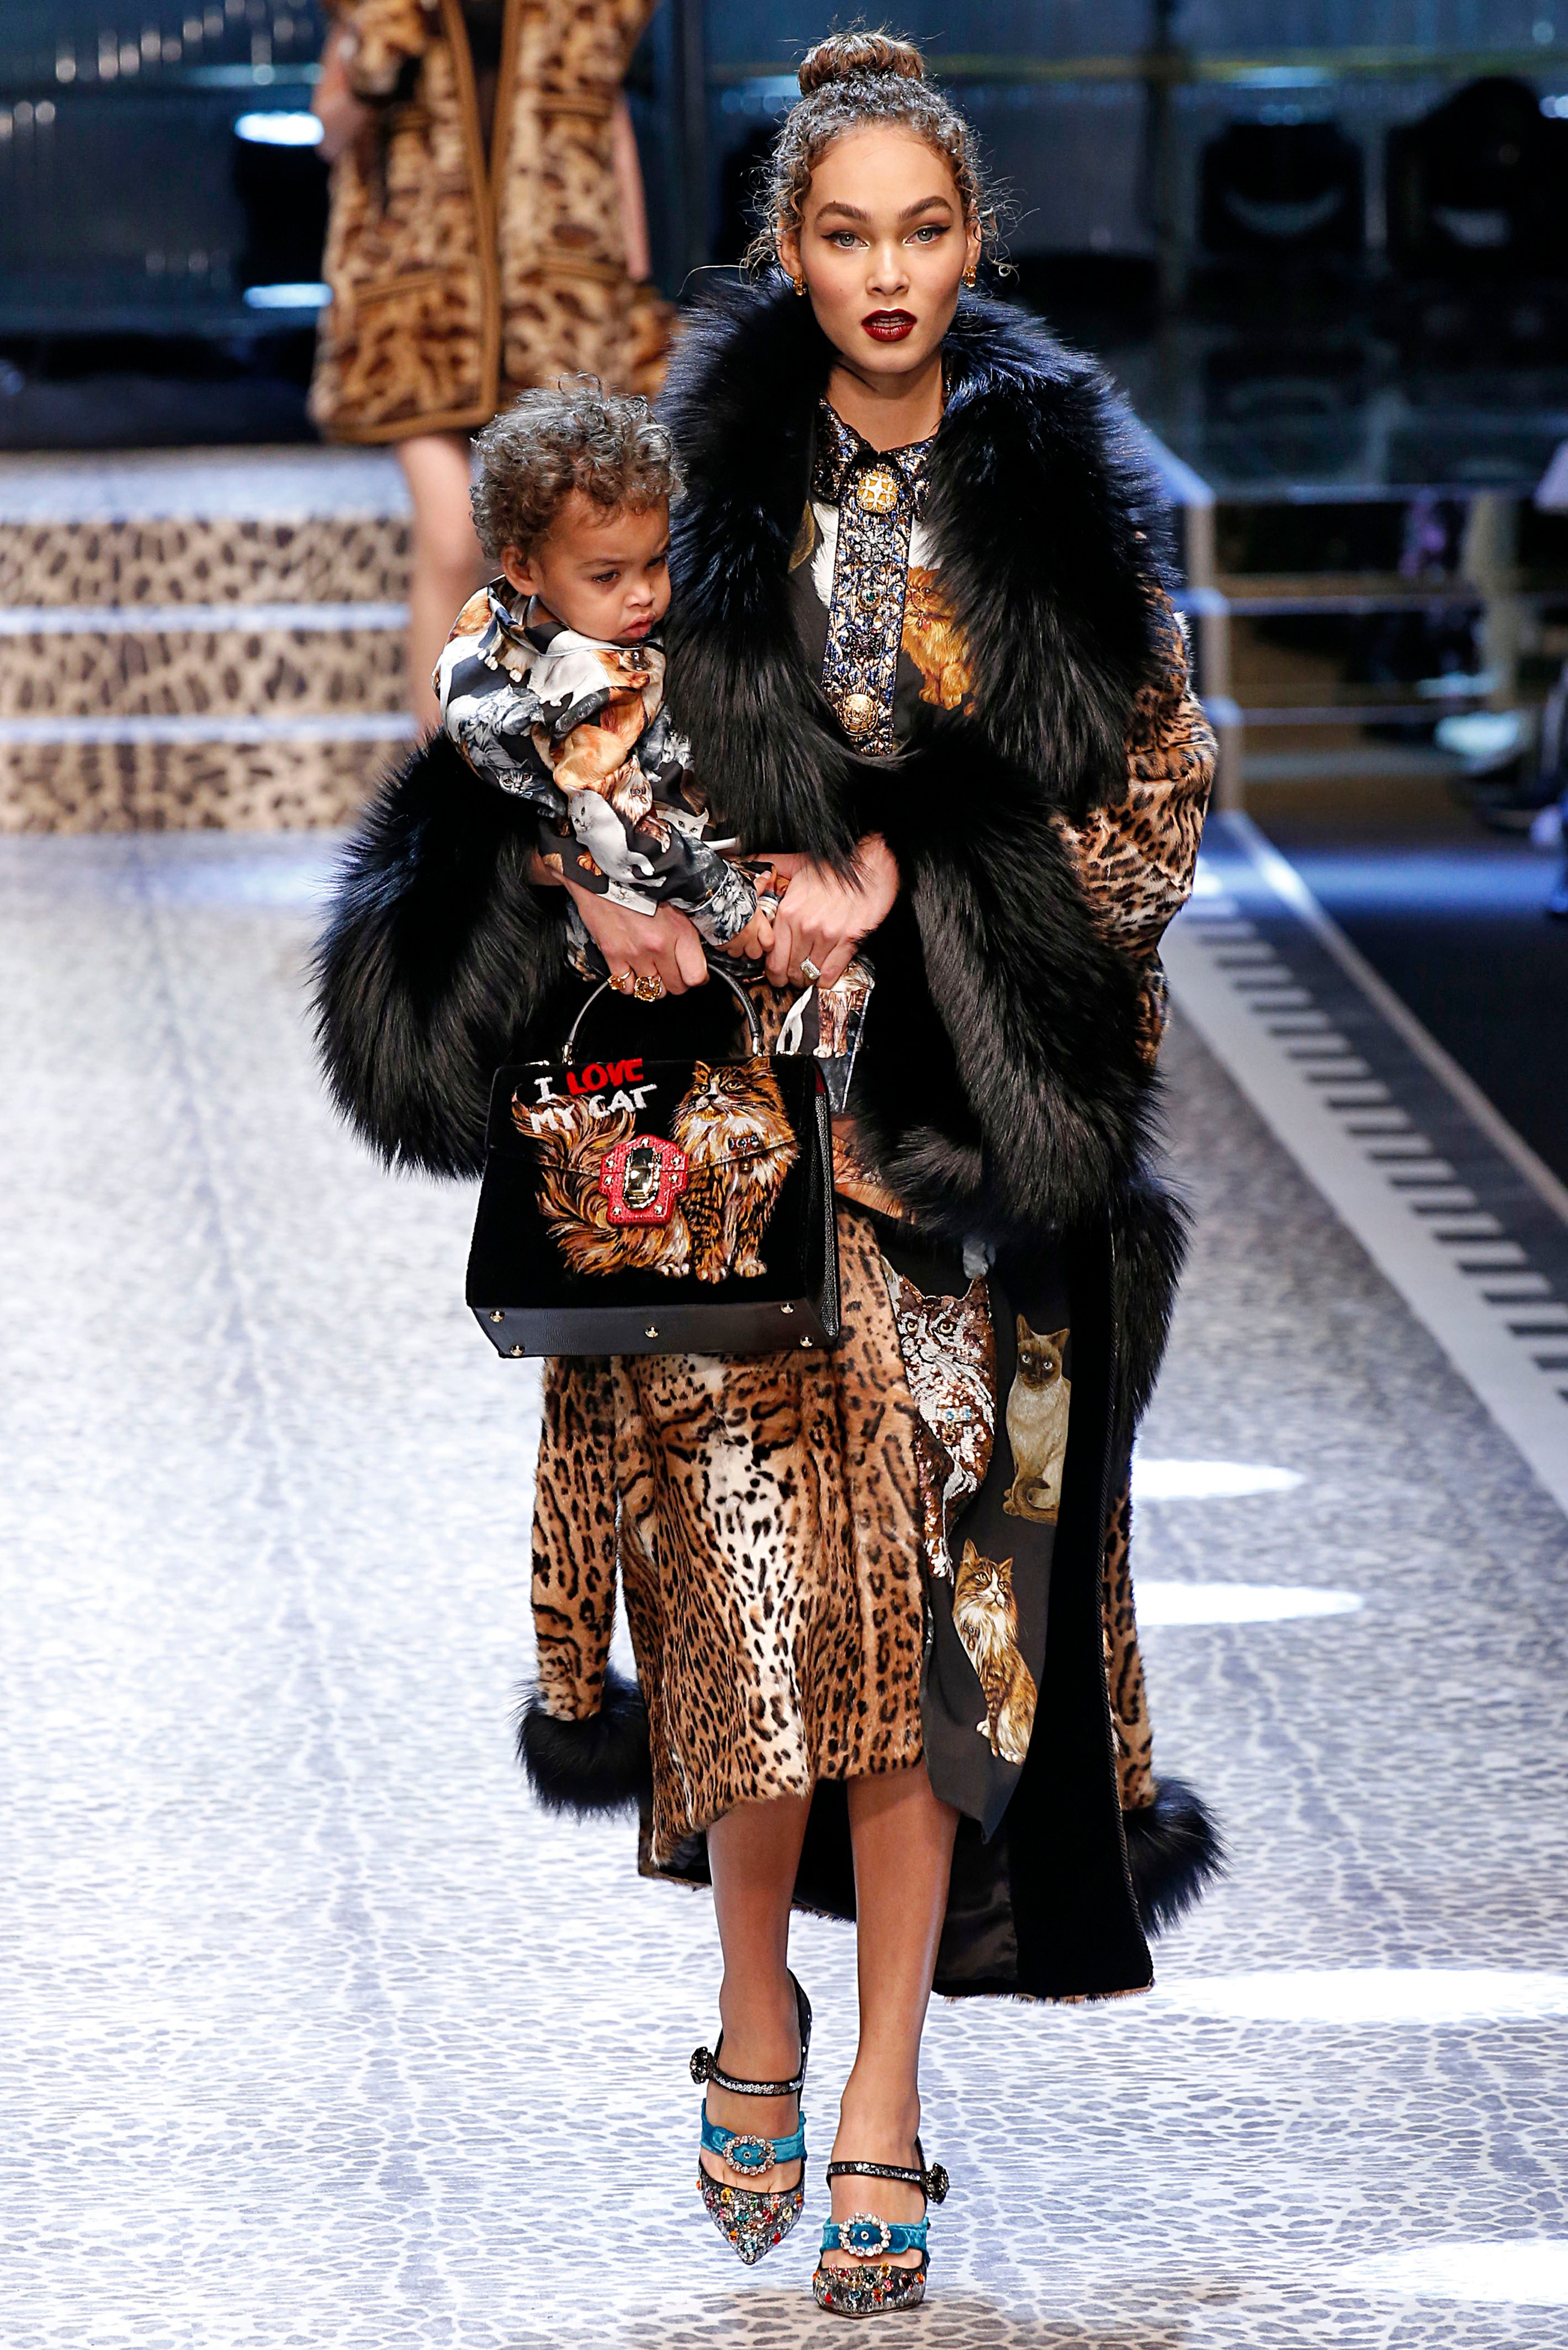 You Have to See How the Harveys Took Over Dolce & Gabbana's Milan Runway Show
